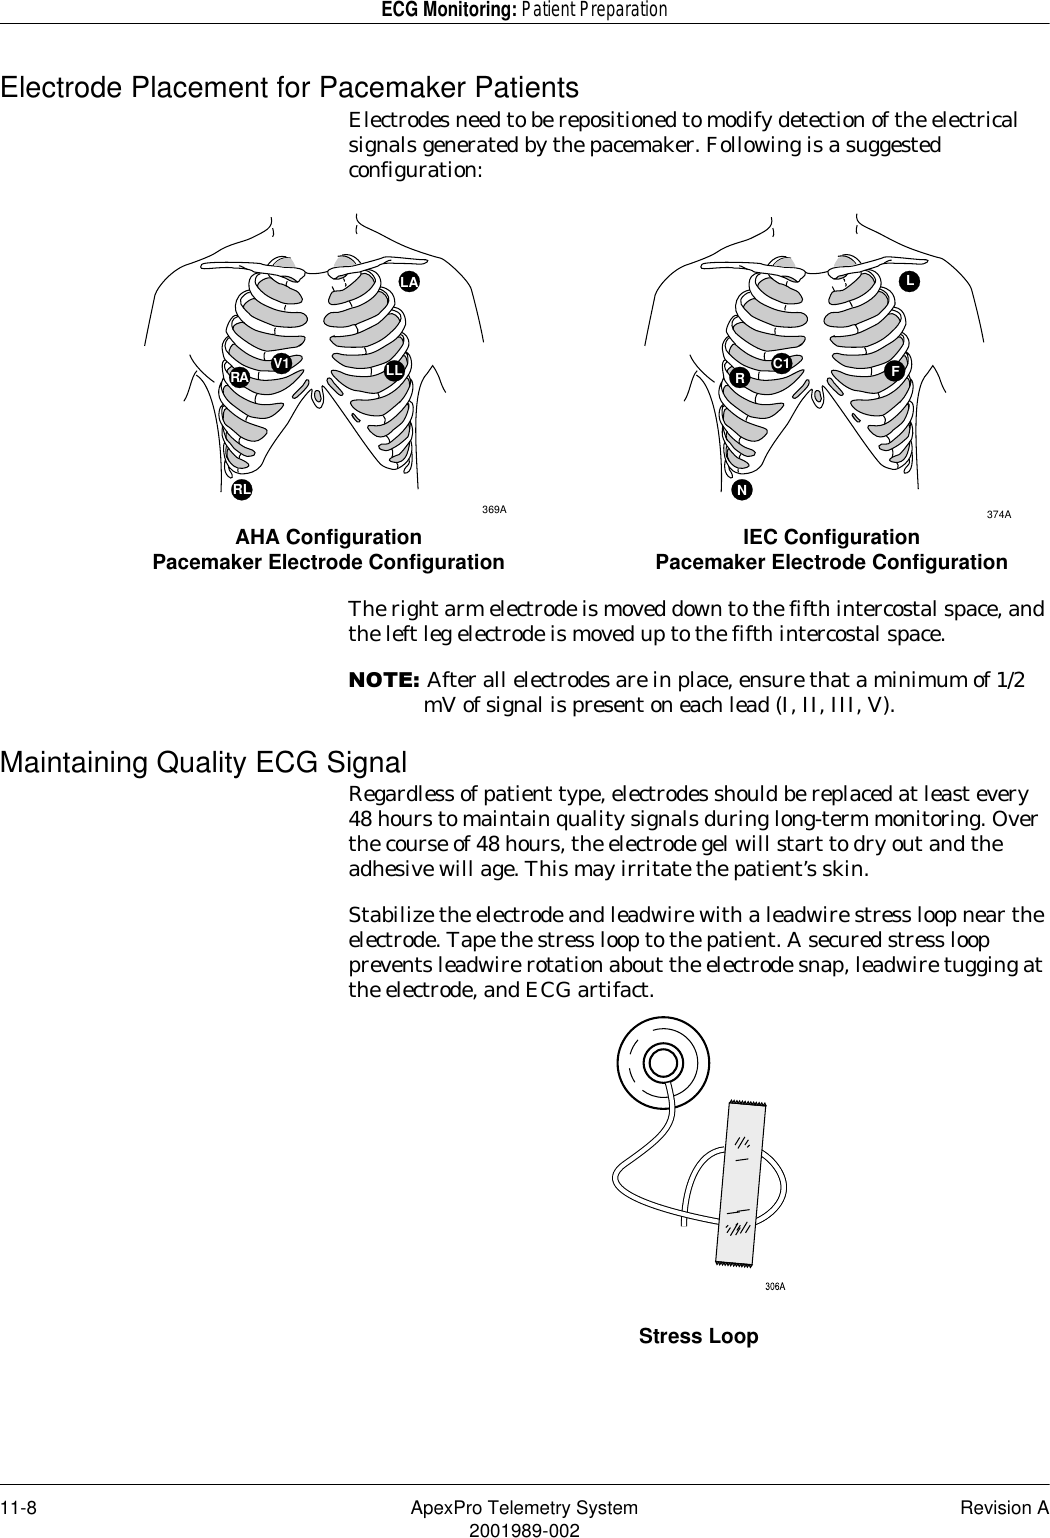 11-8 ApexPro Telemetry System Revision A2001989-002ECG Monitoring: Patient PreparationElectrode Placement for Pacemaker PatientsElectrodes need to be repositioned to modify detection of the electrical signals generated by the pacemaker. Following is a suggested configuration:The right arm electrode is moved down to the fifth intercostal space, and the left leg electrode is moved up to the fifth intercostal space.127(After all electrodes are in place, ensure that a minimum of 1/2 mV of signal is present on each lead (I, II, III, V).Maintaining Quality ECG SignalRegardless of patient type, electrodes should be replaced at least every 48 hours to maintain quality signals during long-term monitoring. Over the course of 48 hours, the electrode gel will start to dry out and the adhesive will age. This may irritate the patient’s skin.Stabilize the electrode and leadwire with a leadwire stress loop near the electrode. Tape the stress loop to the patient. A secured stress loop prevents leadwire rotation about the electrode snap, leadwire tugging at the electrode, and ECG artifact.Stress LoopLC1RFN374ARALAV1 LL RL369AAHA ConfigurationPacemaker Electrode Configuration IEC ConfigurationPacemaker Electrode Configuration